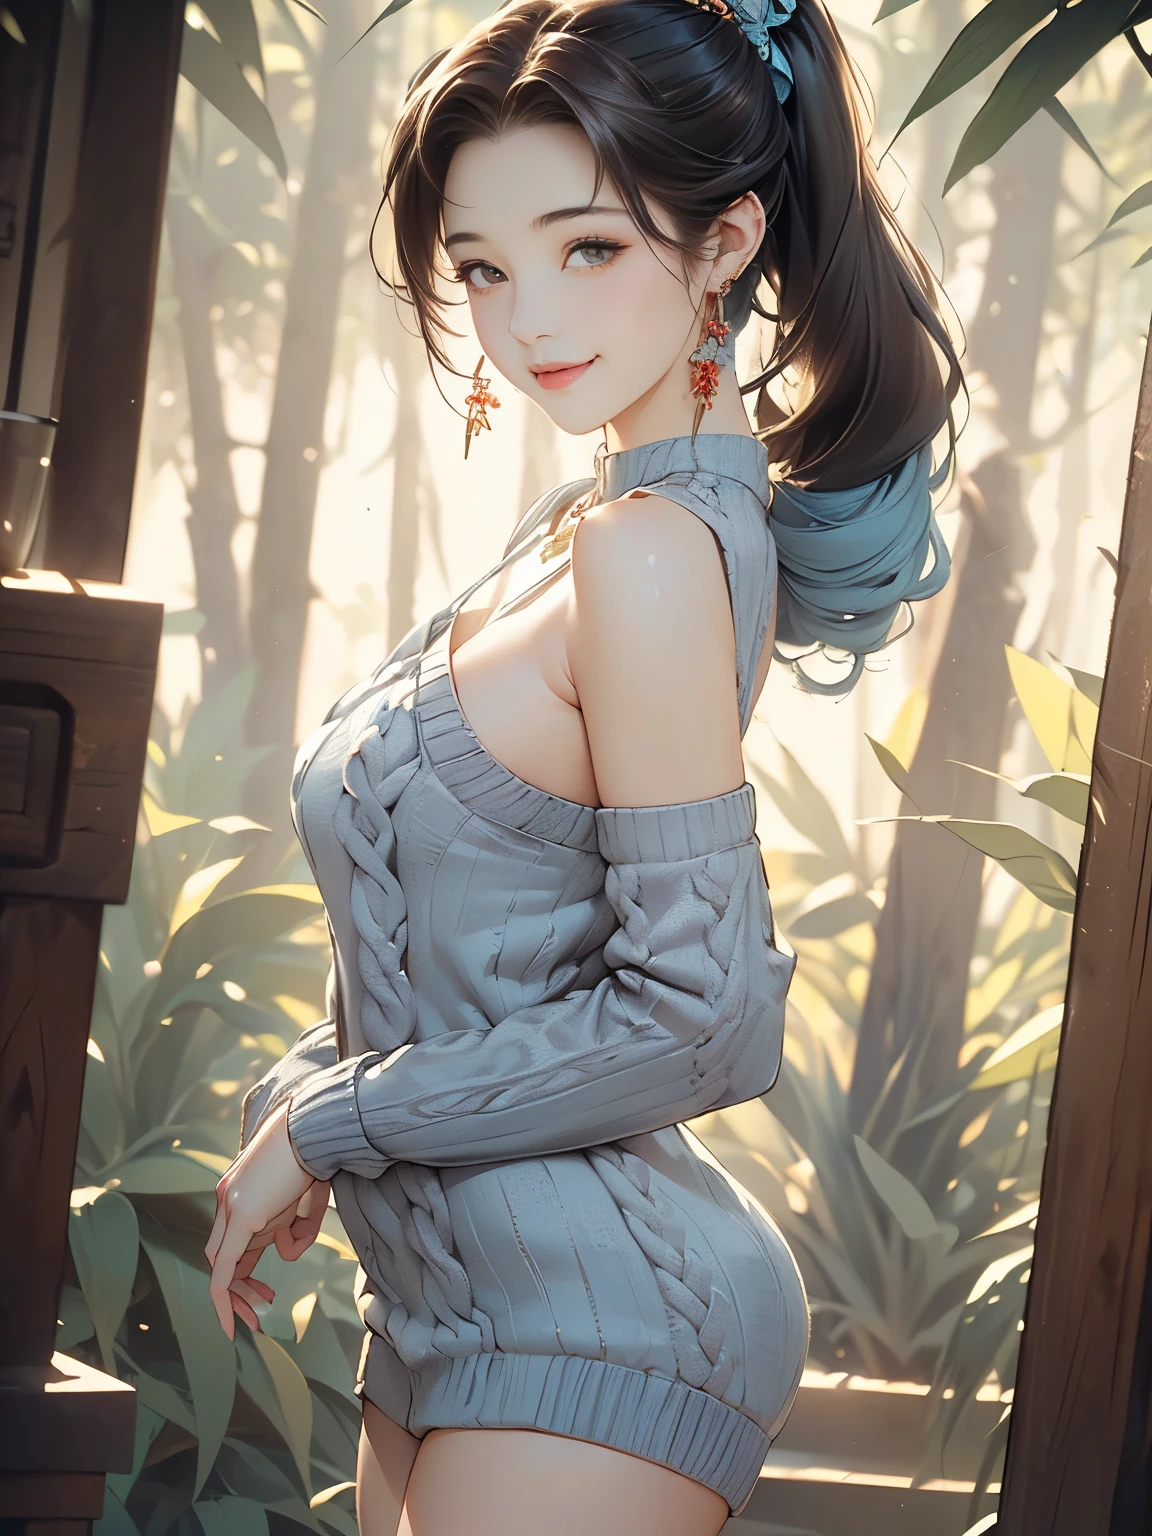 ((((highest quality))))、(((Ultra-precision CG16K wallpaper)))、(((masterpiece)))、(((Super detailed)))、(((super extreme details)))、((１people&#39;s women))、mature woman、24 year old woman、(((clarity、detailed face:1.6)))、((Japanese face))、((very beautiful face))、((Mai Shiraishi:1.5))、((straight long ponytail hair、blunt bangs:1.5))、(shiny brown hair)、((Big eyes with double eyelids))、beautiful delicate eyes、brown eyes、raised eyebrows、high nose、small nostrils、small mouth、seductive lips、beautiful breasts、((C cup size breasts))、cleavage、plump body、(Chubby body type)、perfect proportions、perfect anatomy、perfect composition、beautiful detailed shading、beautiful natural lighting、beautiful detail glow、Depth of the bounds written、(((High chroma)))、(((real:1.9)))、((vivid:1.5))、((edge:1.6))、((beautiful skin))、((skin texture))、((Realistic skin feel))、(((thigh-high cowboy shot:1.6)))、((front angle:1.8))、((A shy, smiling face:1.5))、(Eyes looking at me:1.5)、Bright daylight、Natural light、(((in the forest:1.5)))、(Walking pose:1.5)、(((V-neck rib knit long sweater_light blue color clothing:1.6)))、((earrings、wearing necklace:1.3))、